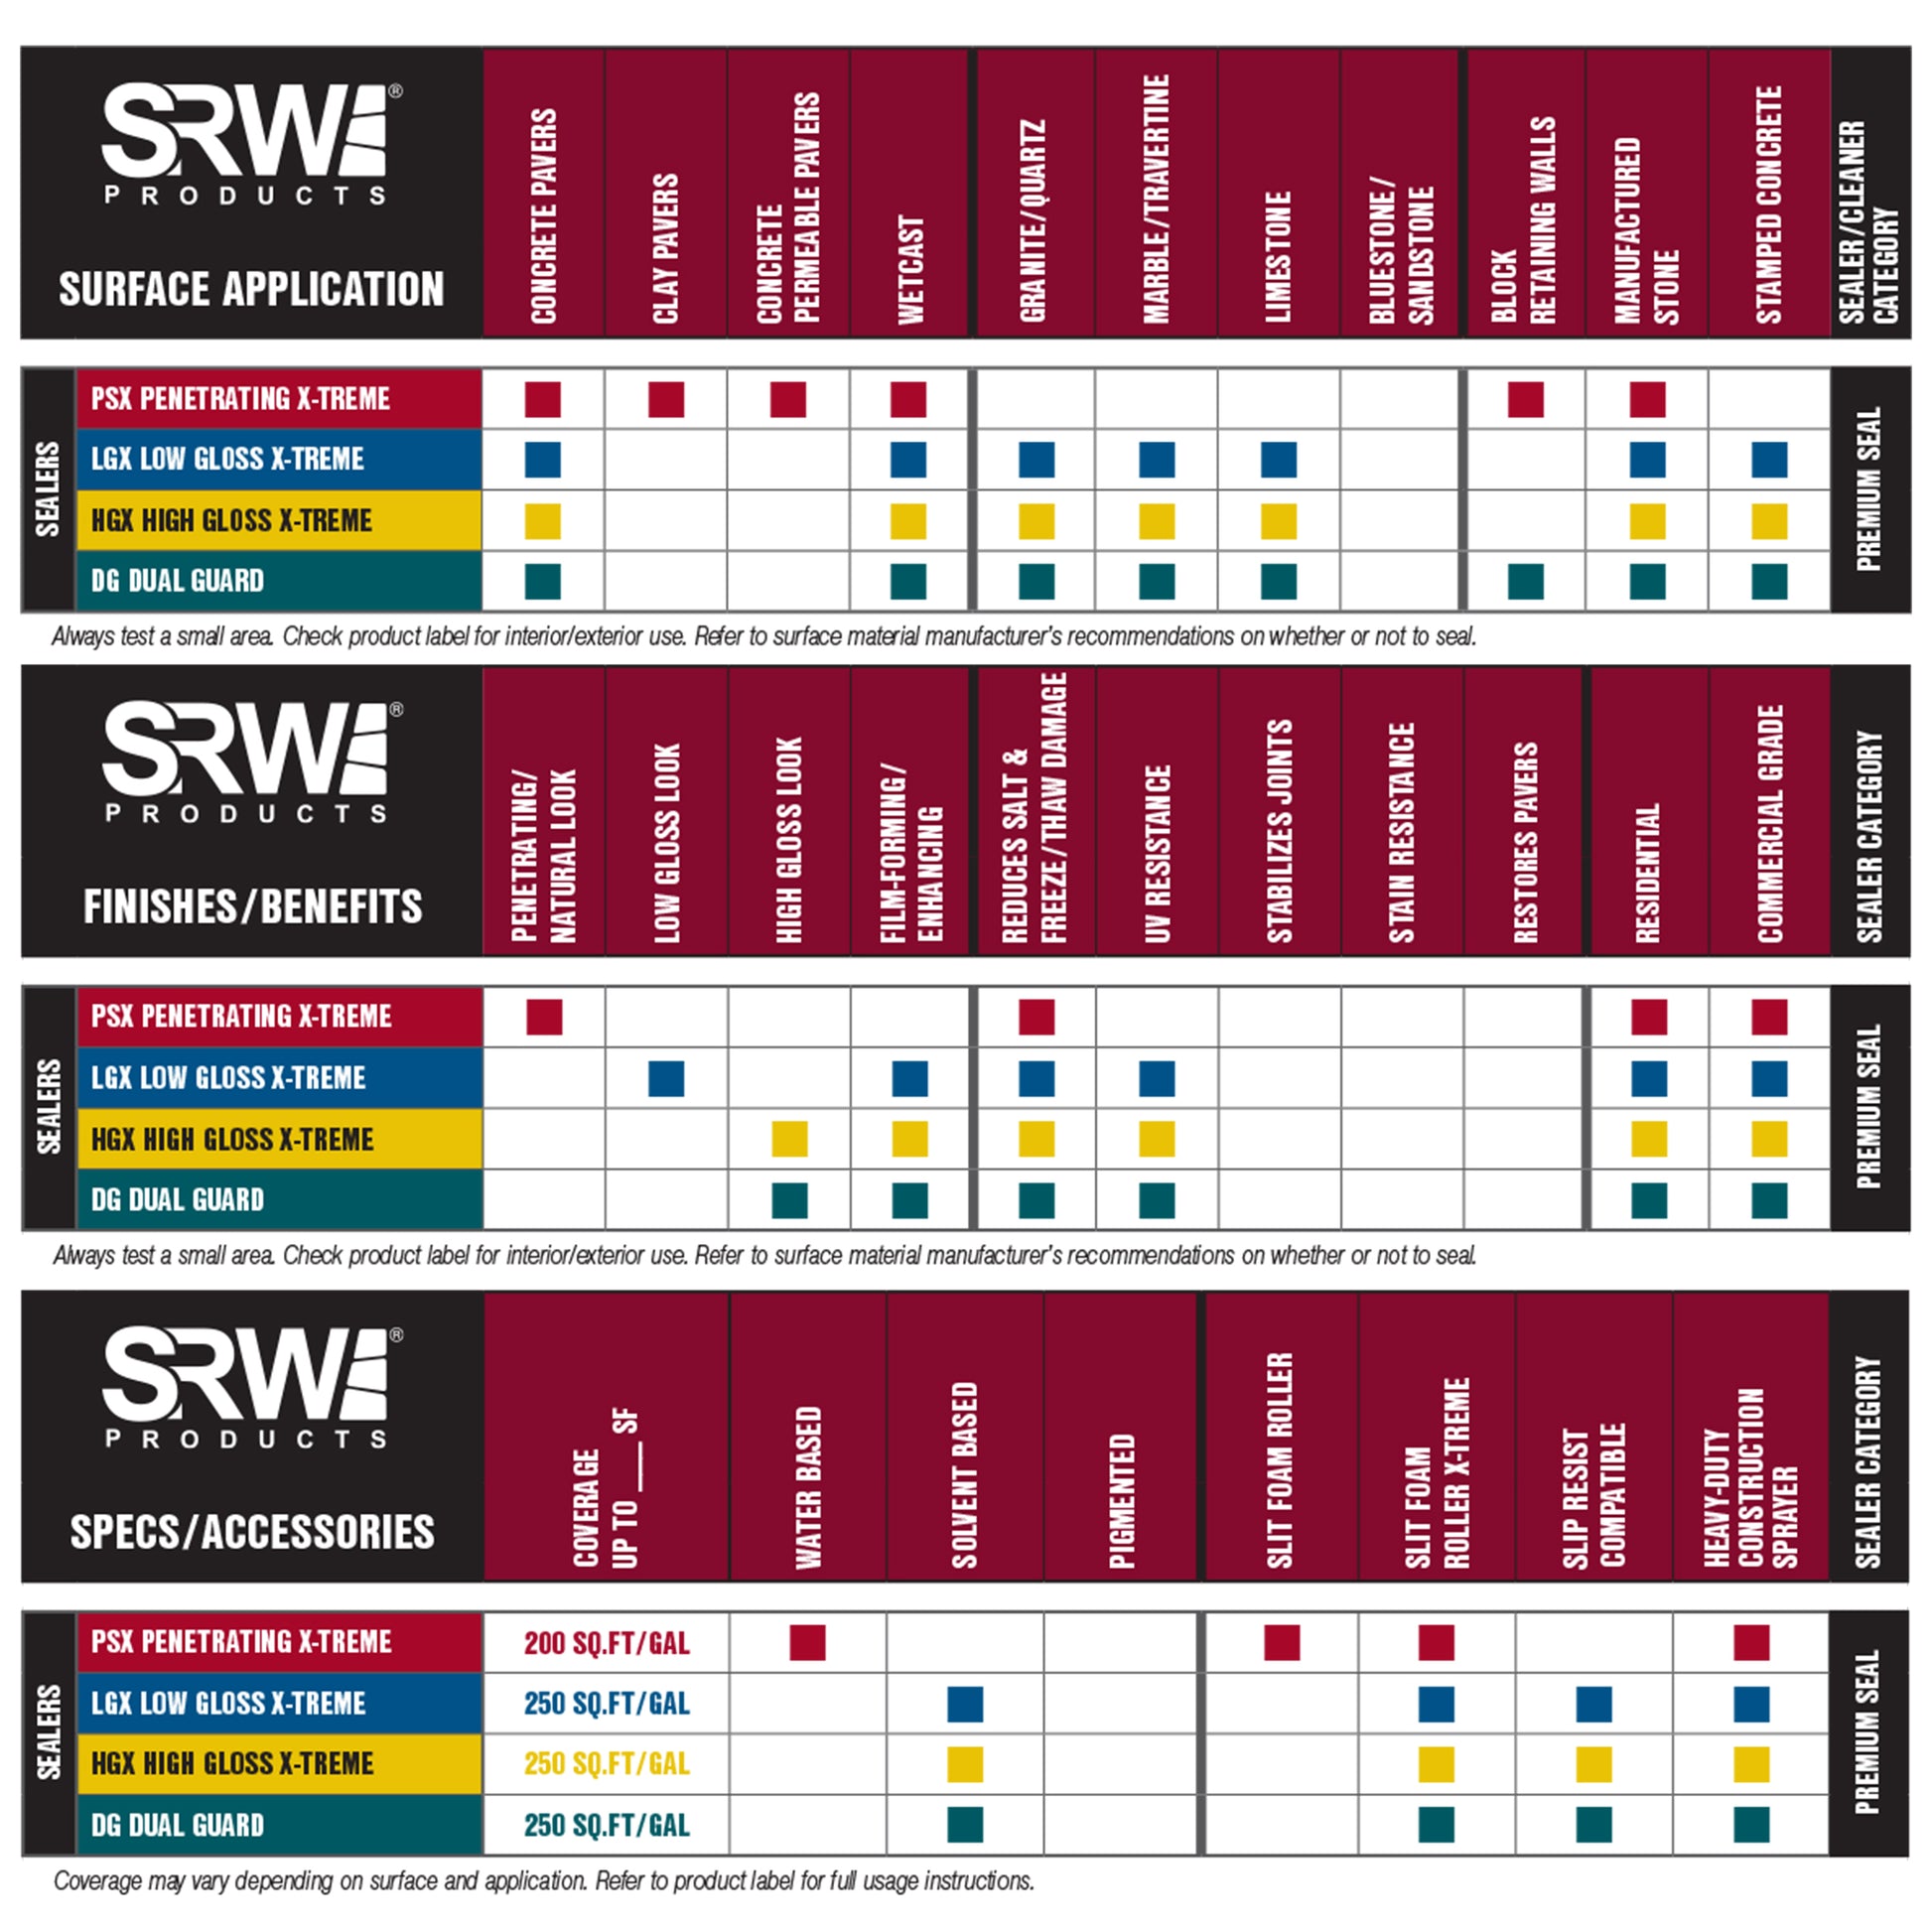 SRW Products chart application